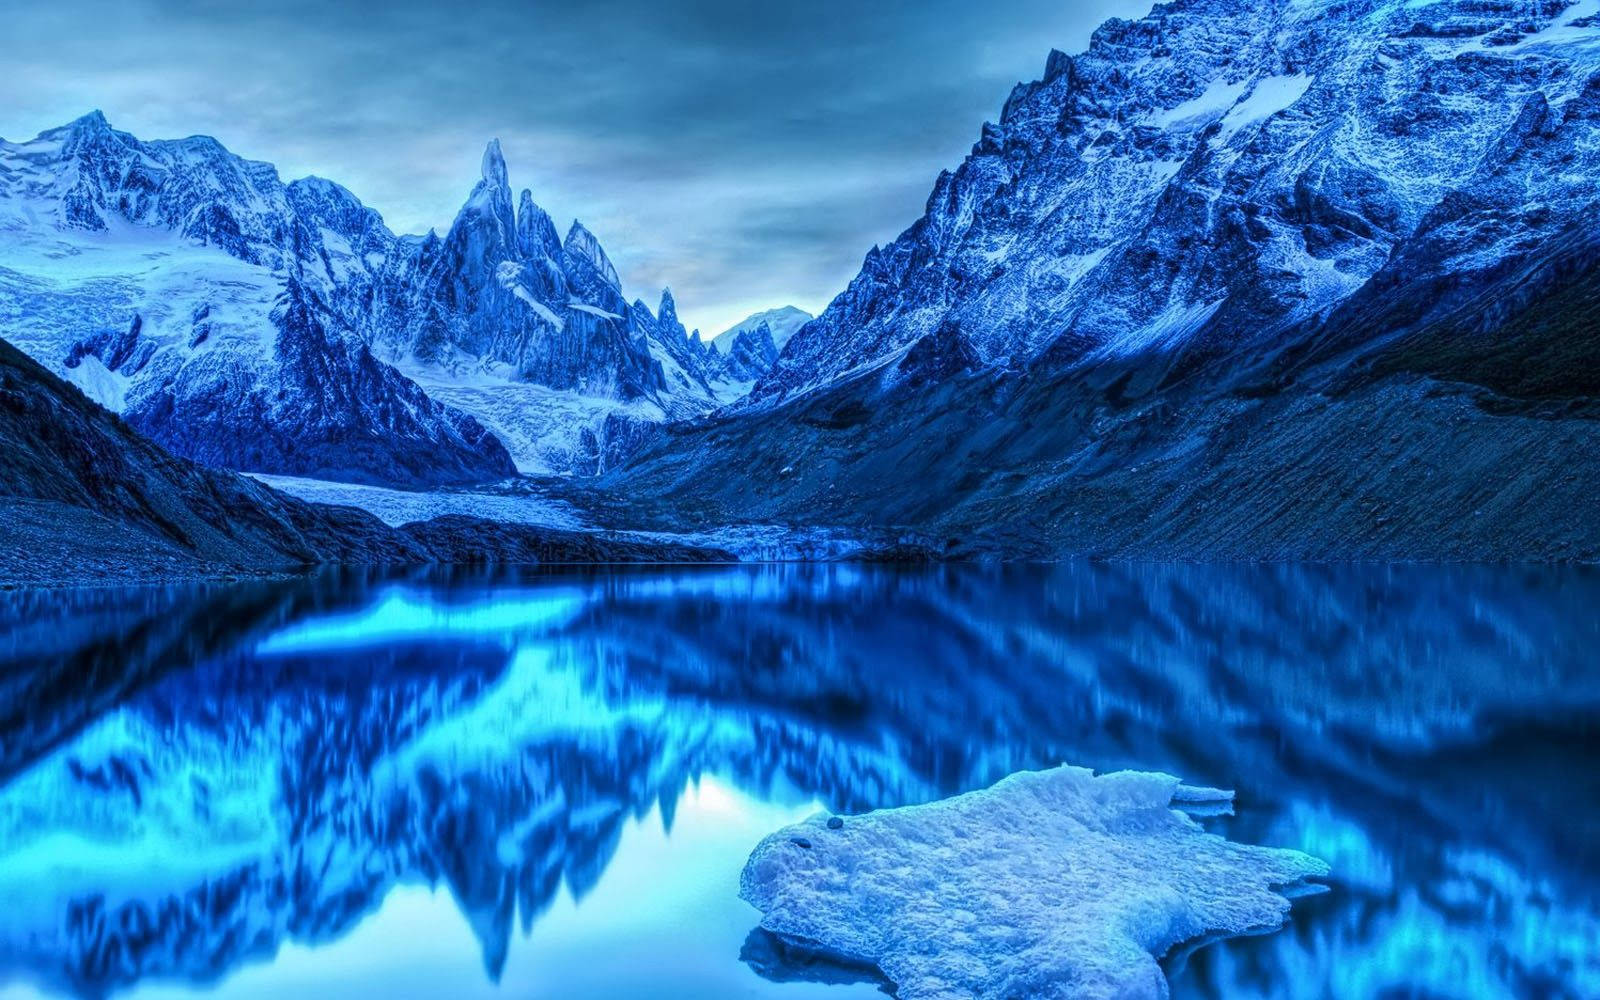 A stunning icy scene of the snowy mountains in winter Wallpaper